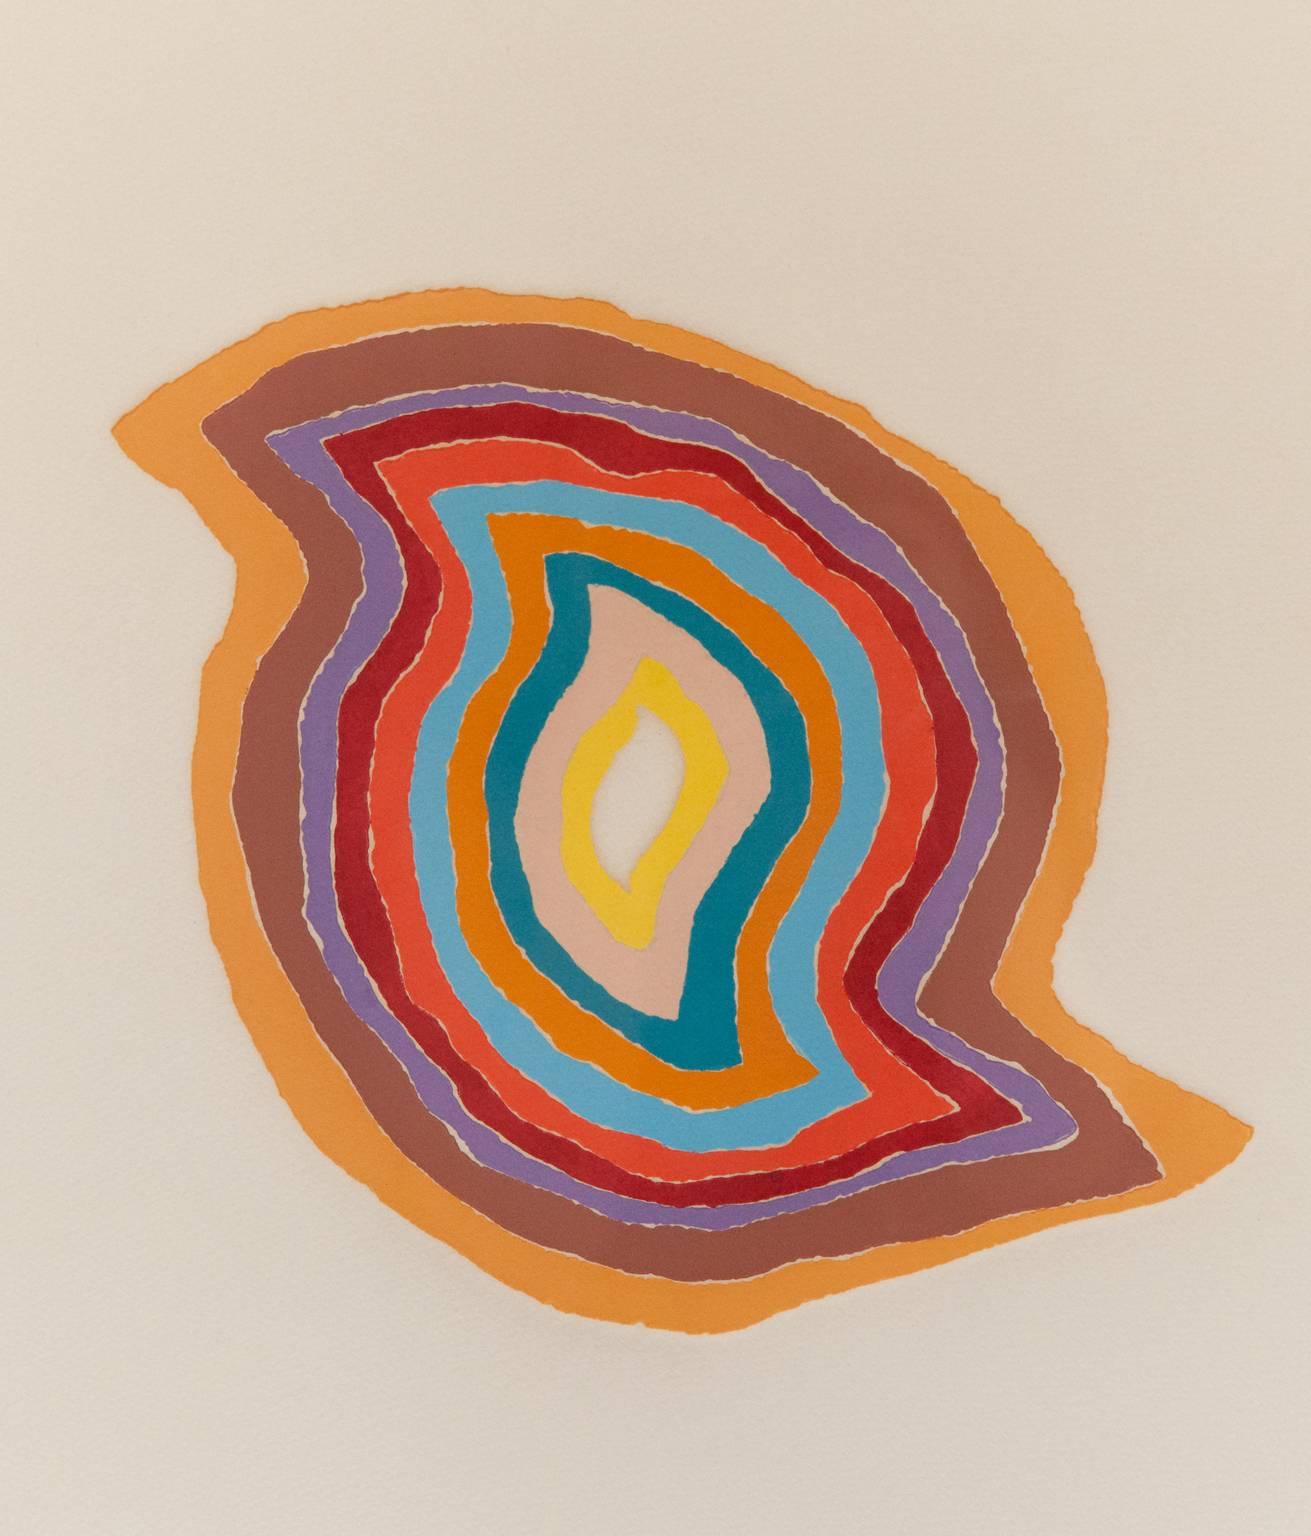 Alongside Vasa Mihich, Frank Stella and Rita Letendre, Arthur Secunda (b. 1927) is an artist we at Caviar20 are especially enthusiastic about for his exceptional geometric compositions and dynamic use of color. 

Secunda is poised for a